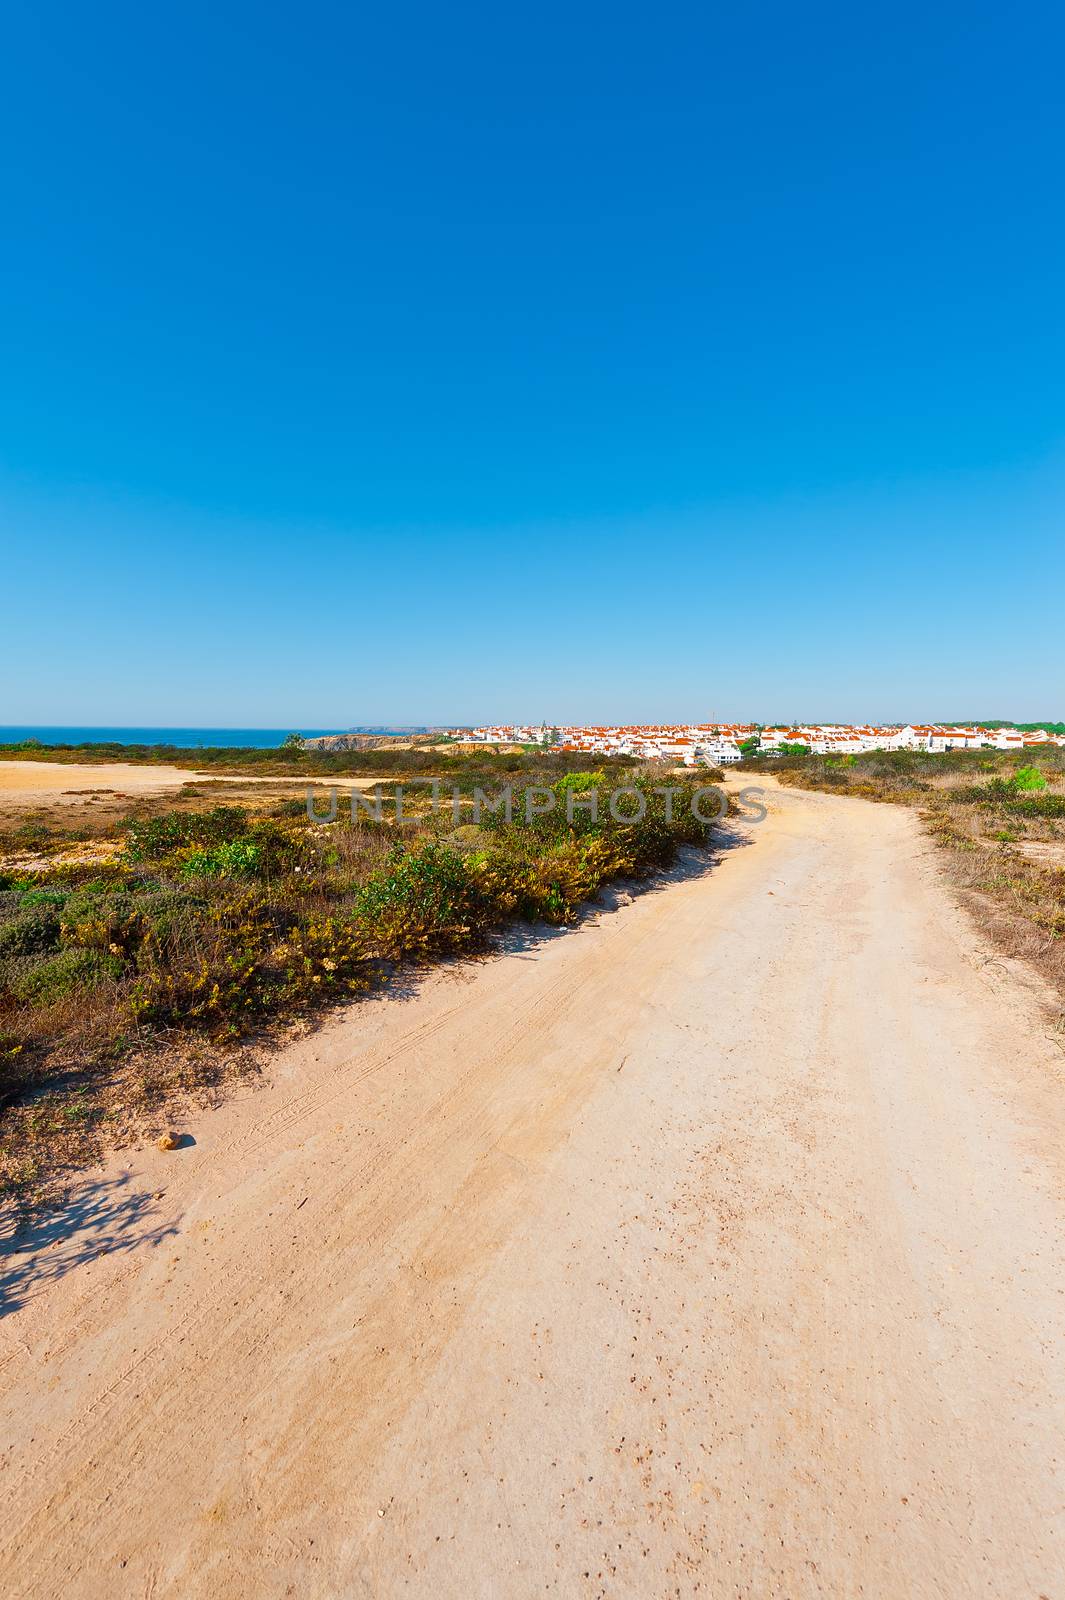 The Dirt Road Leading to the City on the Atlantic Coast of Portugal